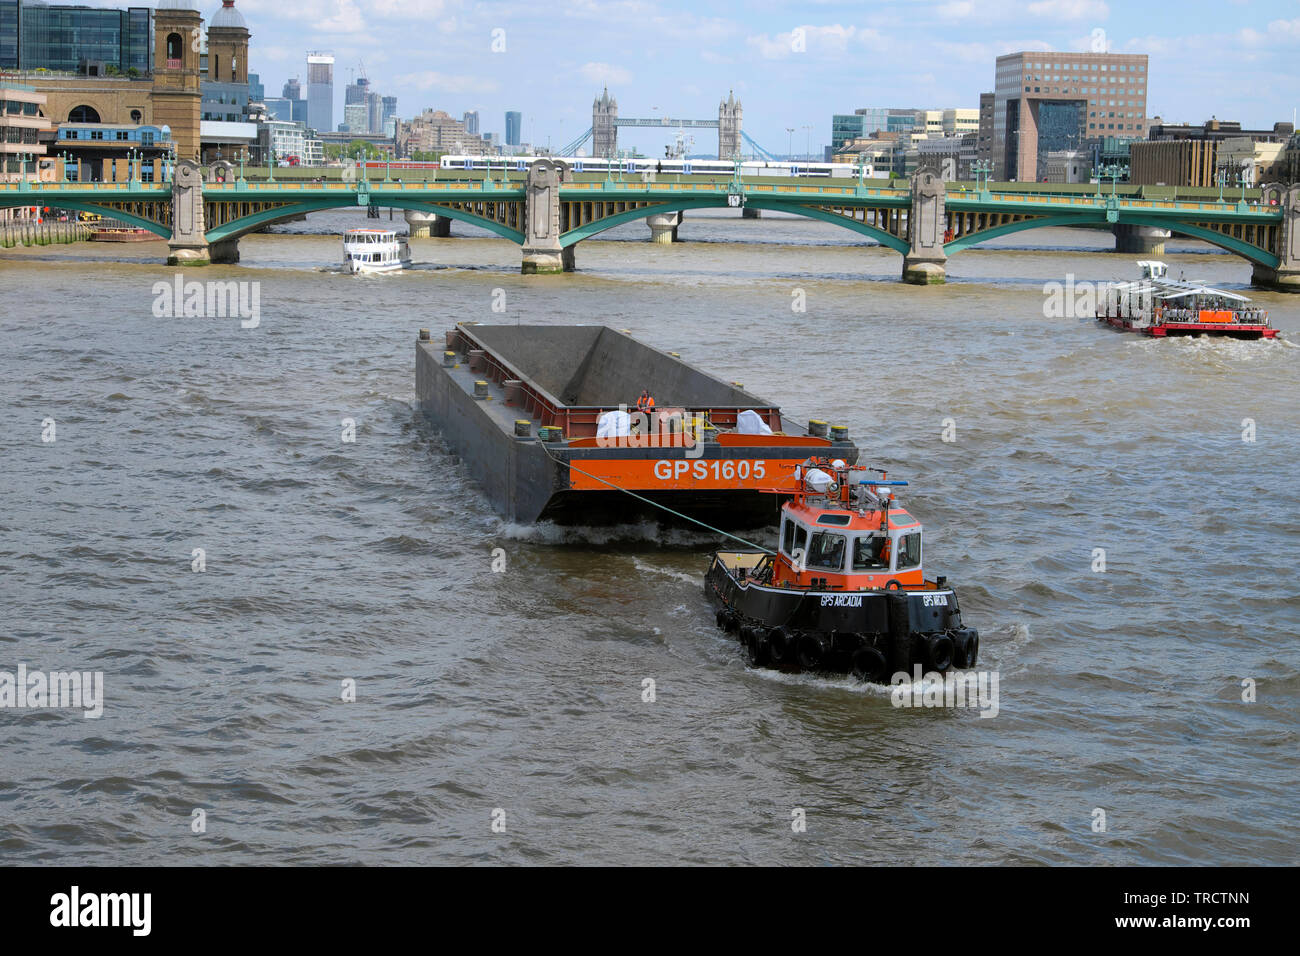 View of tugboat towing barge & boats on River Thames, Southwark Bridge and Tower Bridge and city from Millennium Bridge London England UK KATHY DEWITT Stock Photo